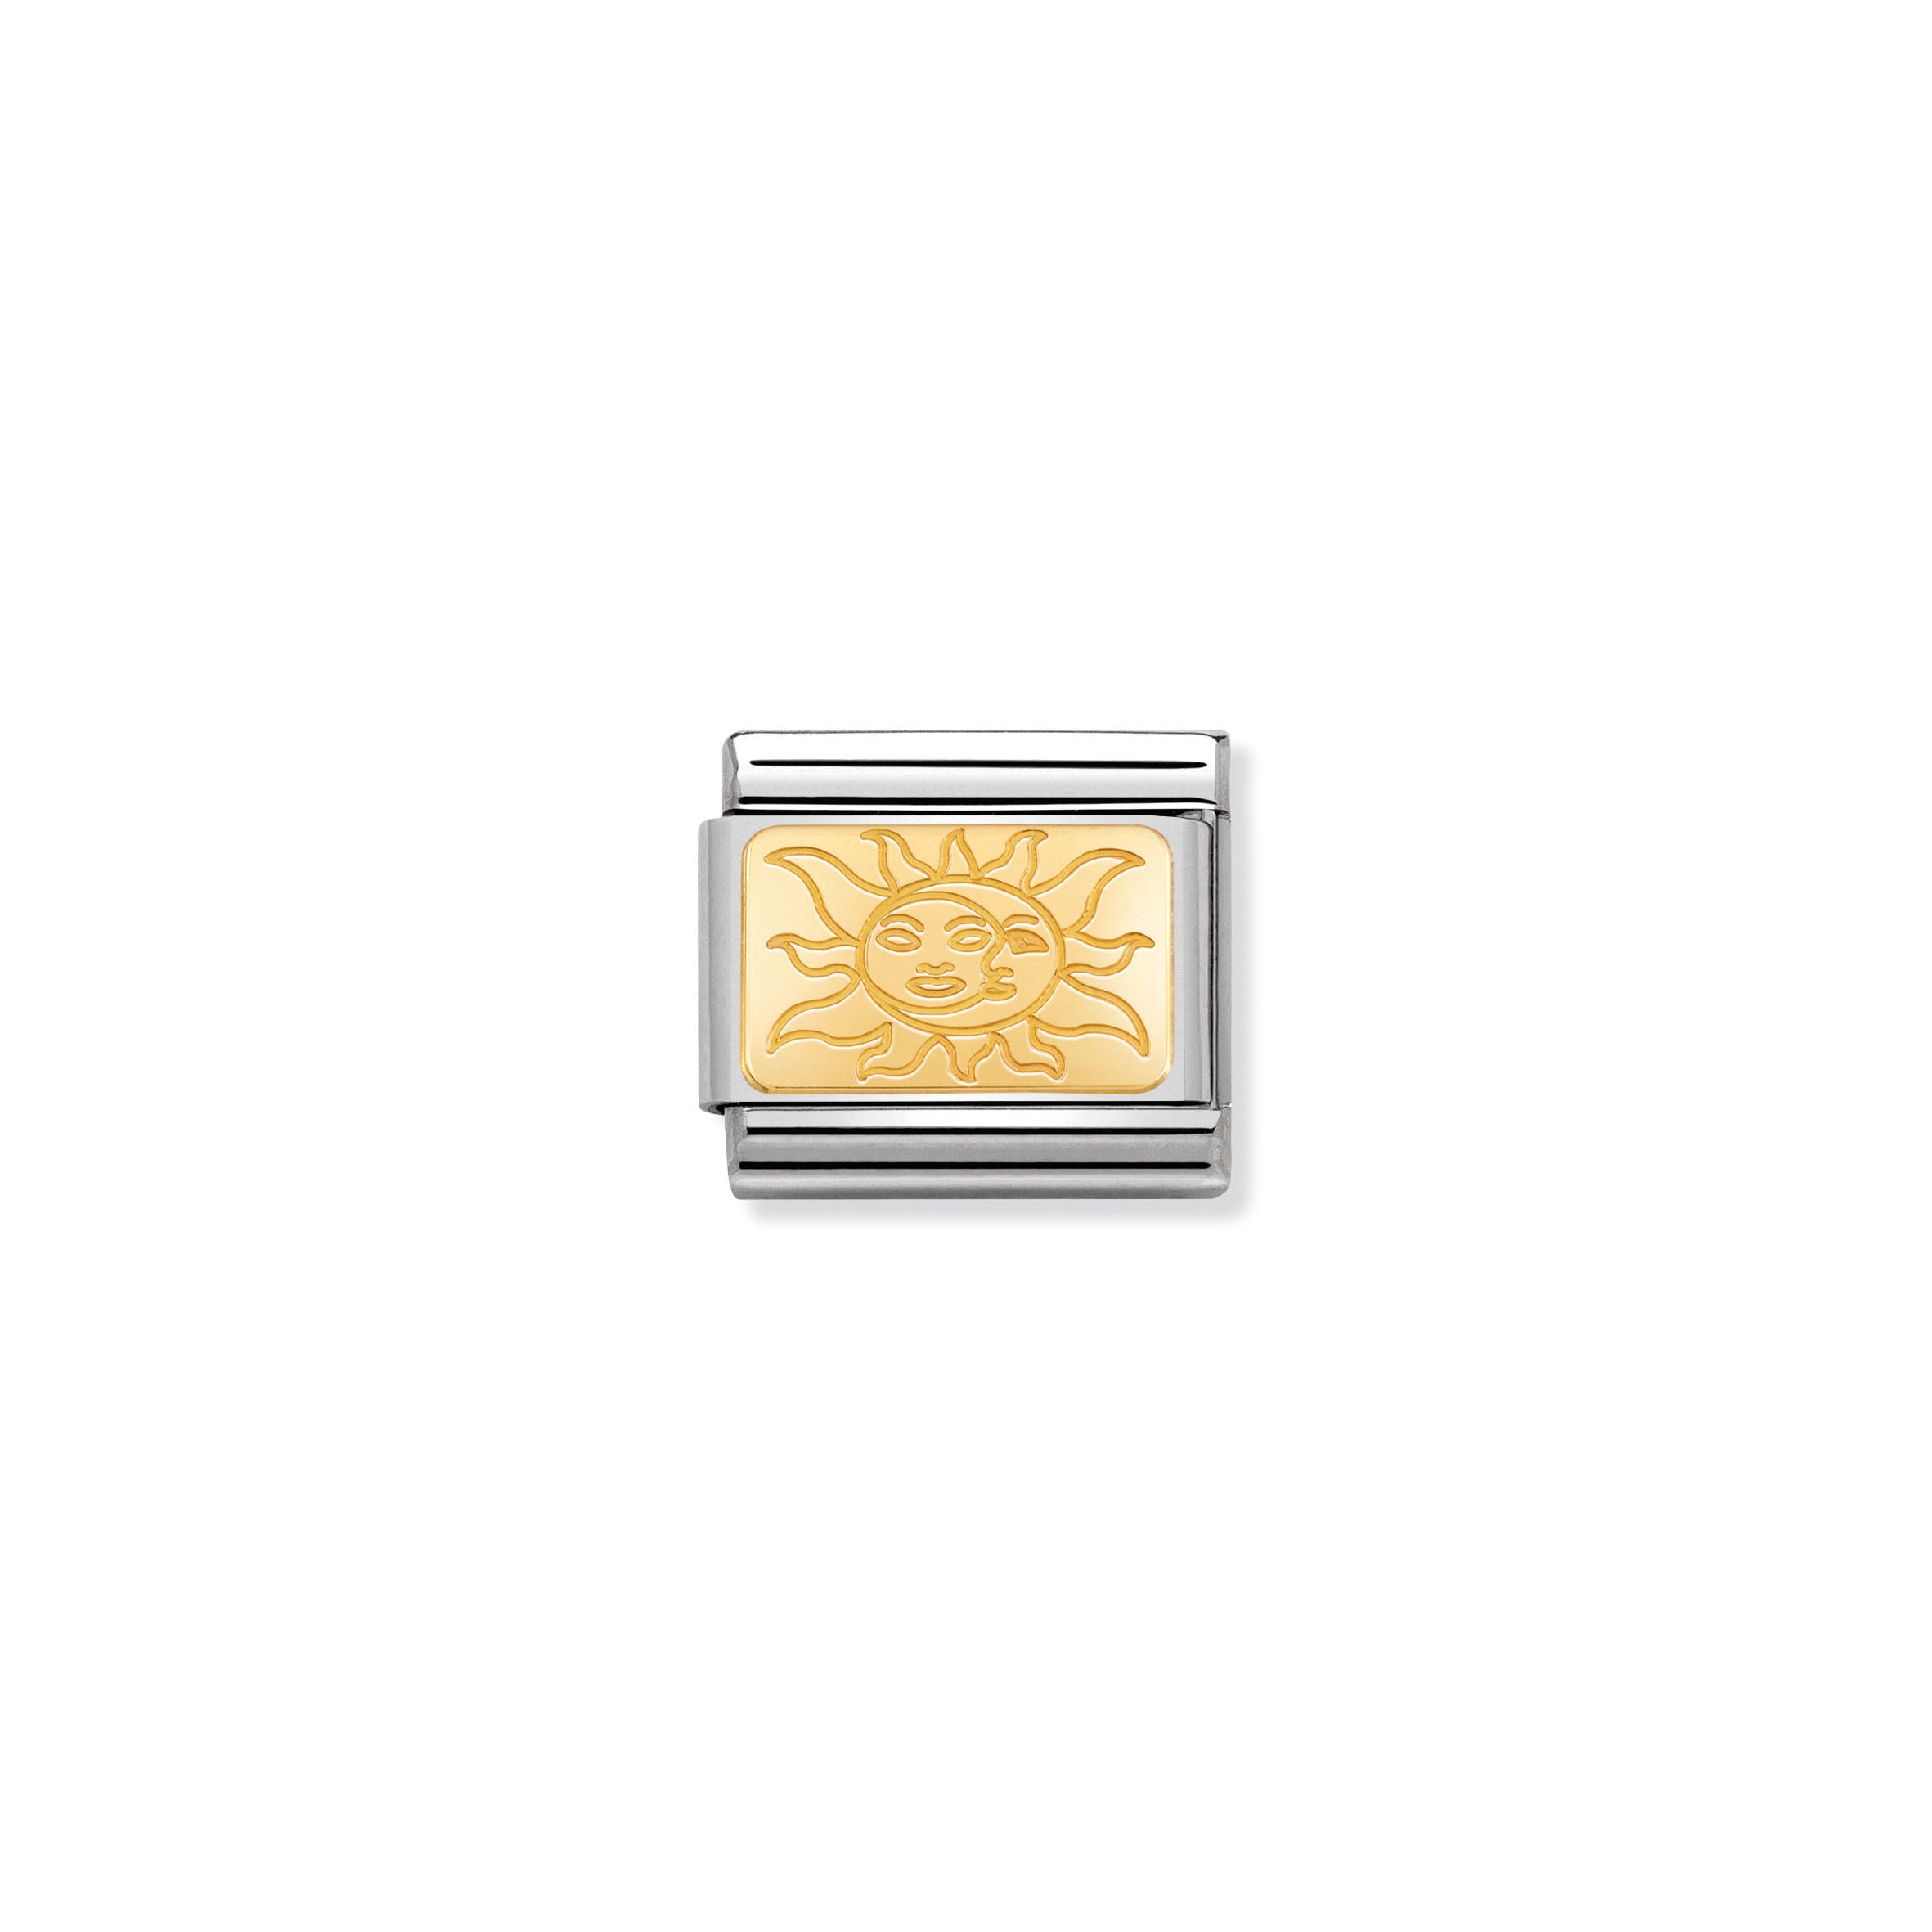 NOMINATION - Composable Classic SYMBOLS PLATES st/st & 18ct gold (Plate with Sun&moon)